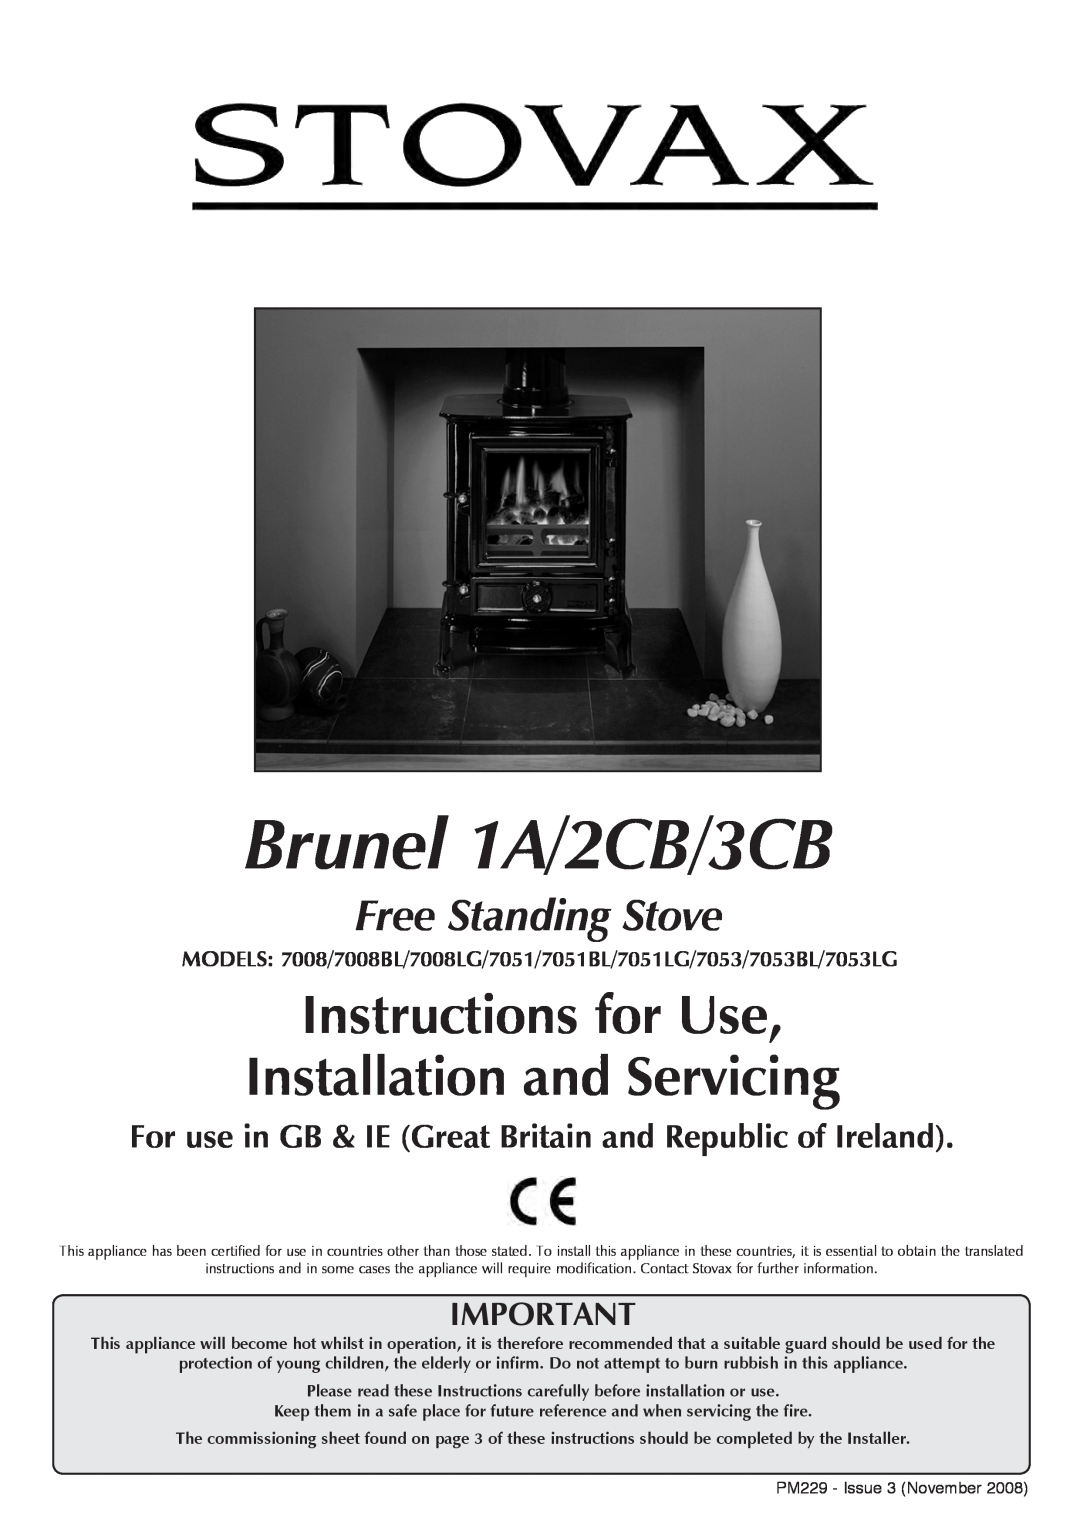 Stovax 7051Bl, 7053lG manual Brunel 1A/2CB/3CB, Instructions for Use Installation and Servicing, Free Standing Stove 